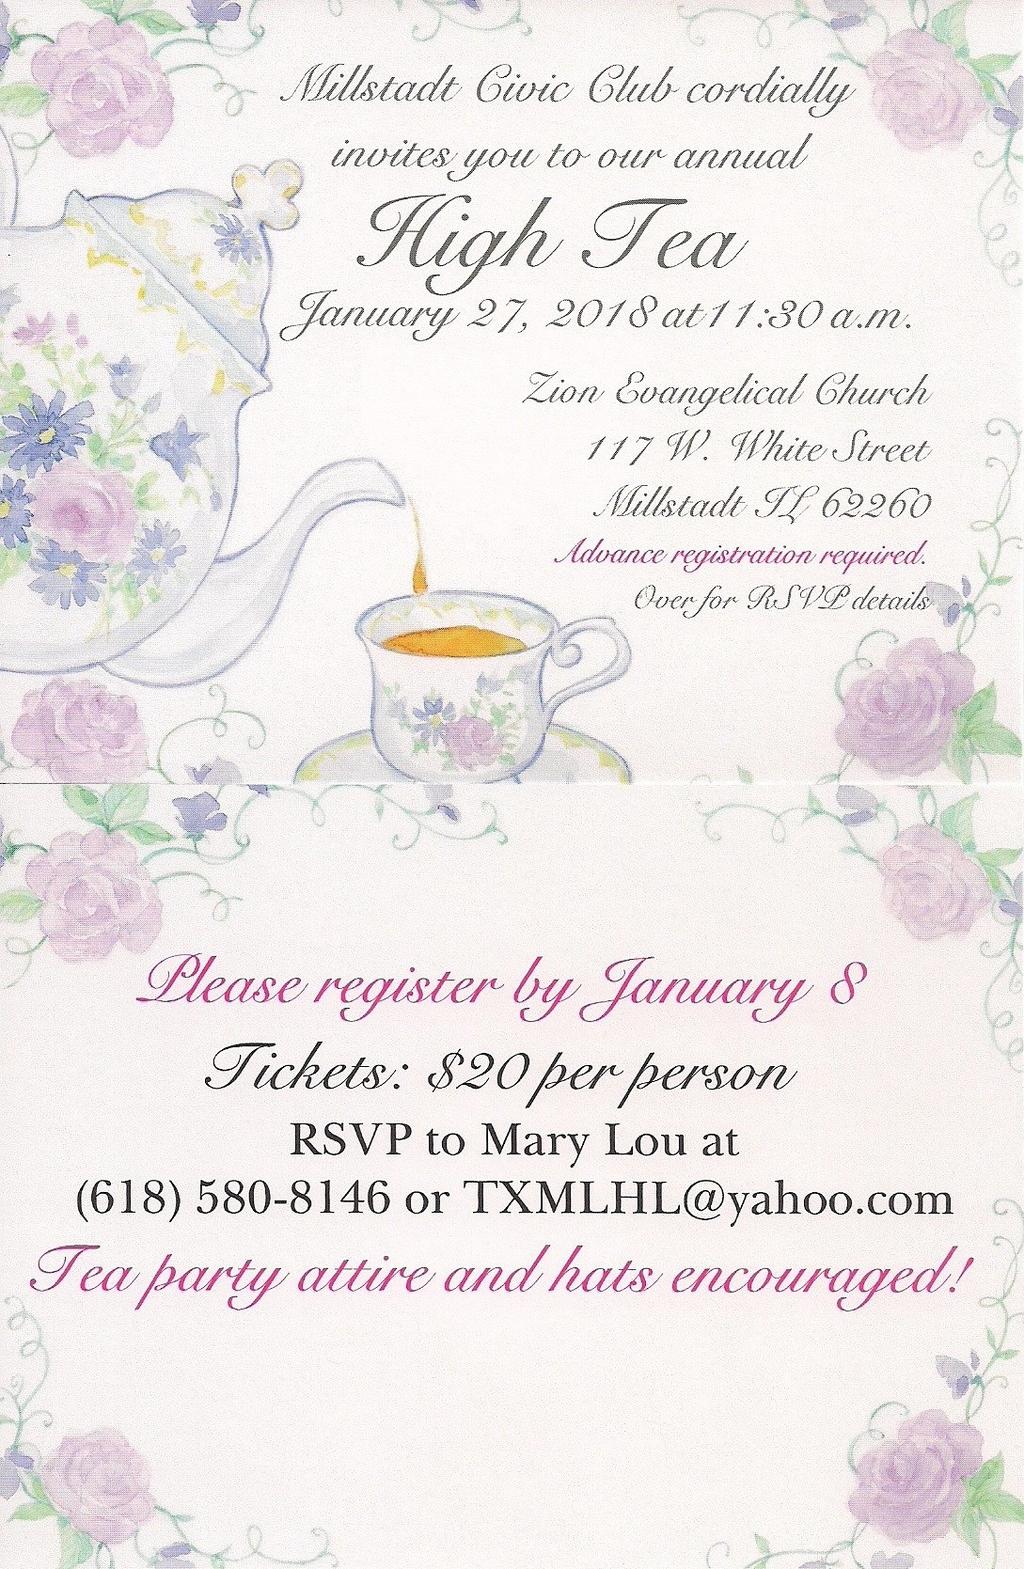 Millstadt Civic Club Presents Annual High Tea Wear your favorite hat and attend in style!